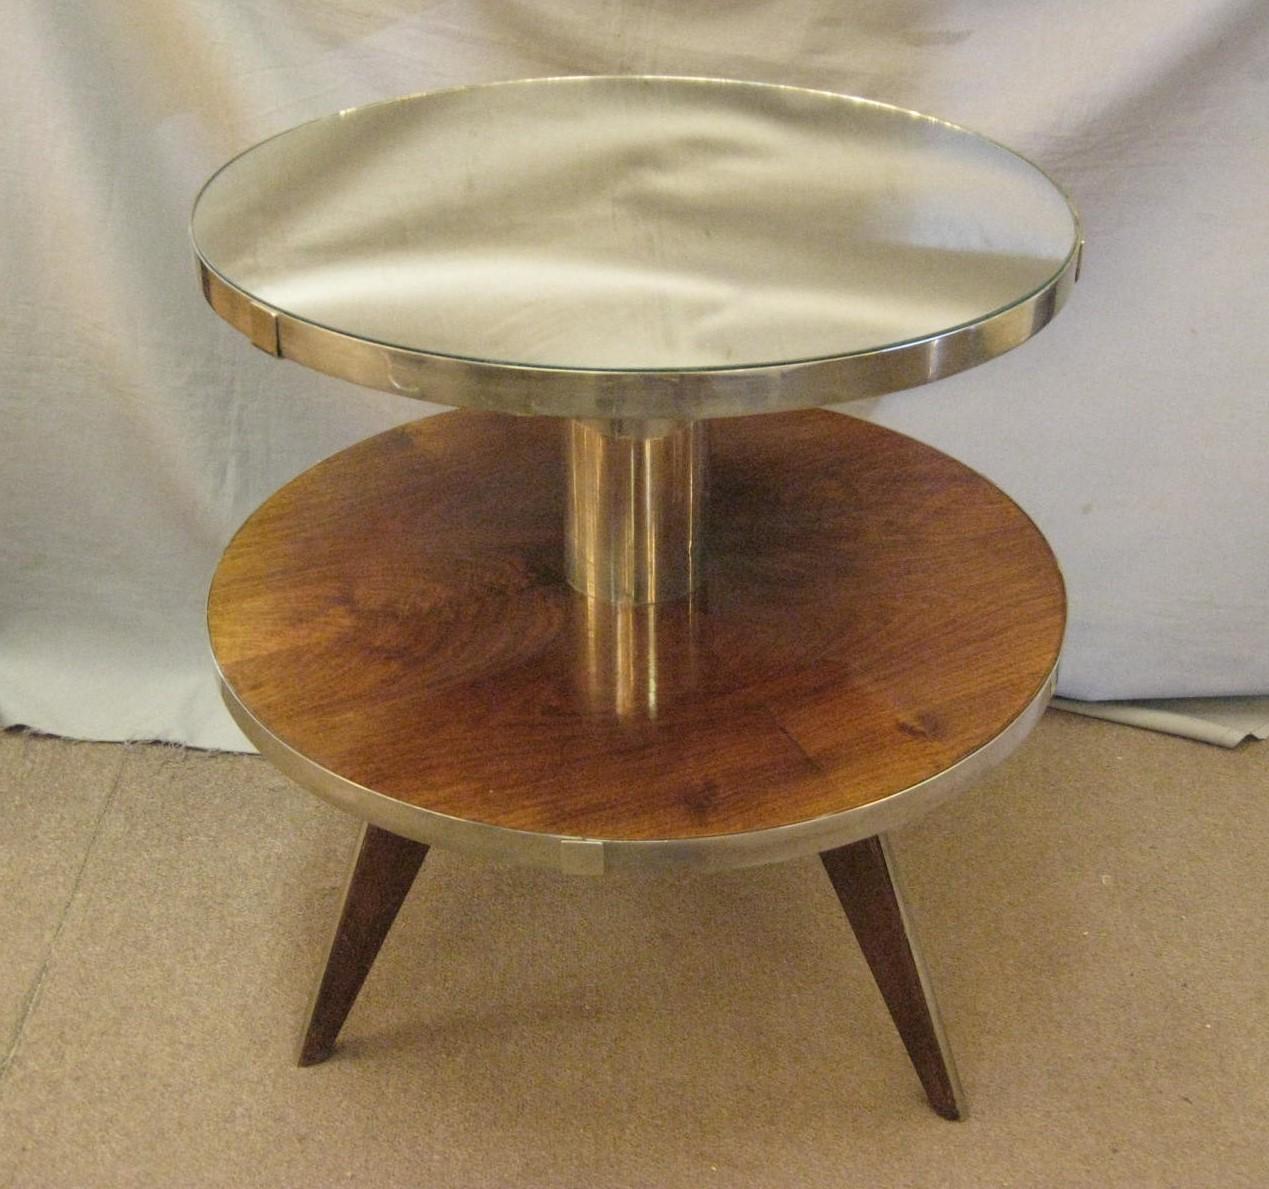 French Art Deco Occasional Table in Wood, Mirror, Nickel -Maurice Triboy For Sale 12